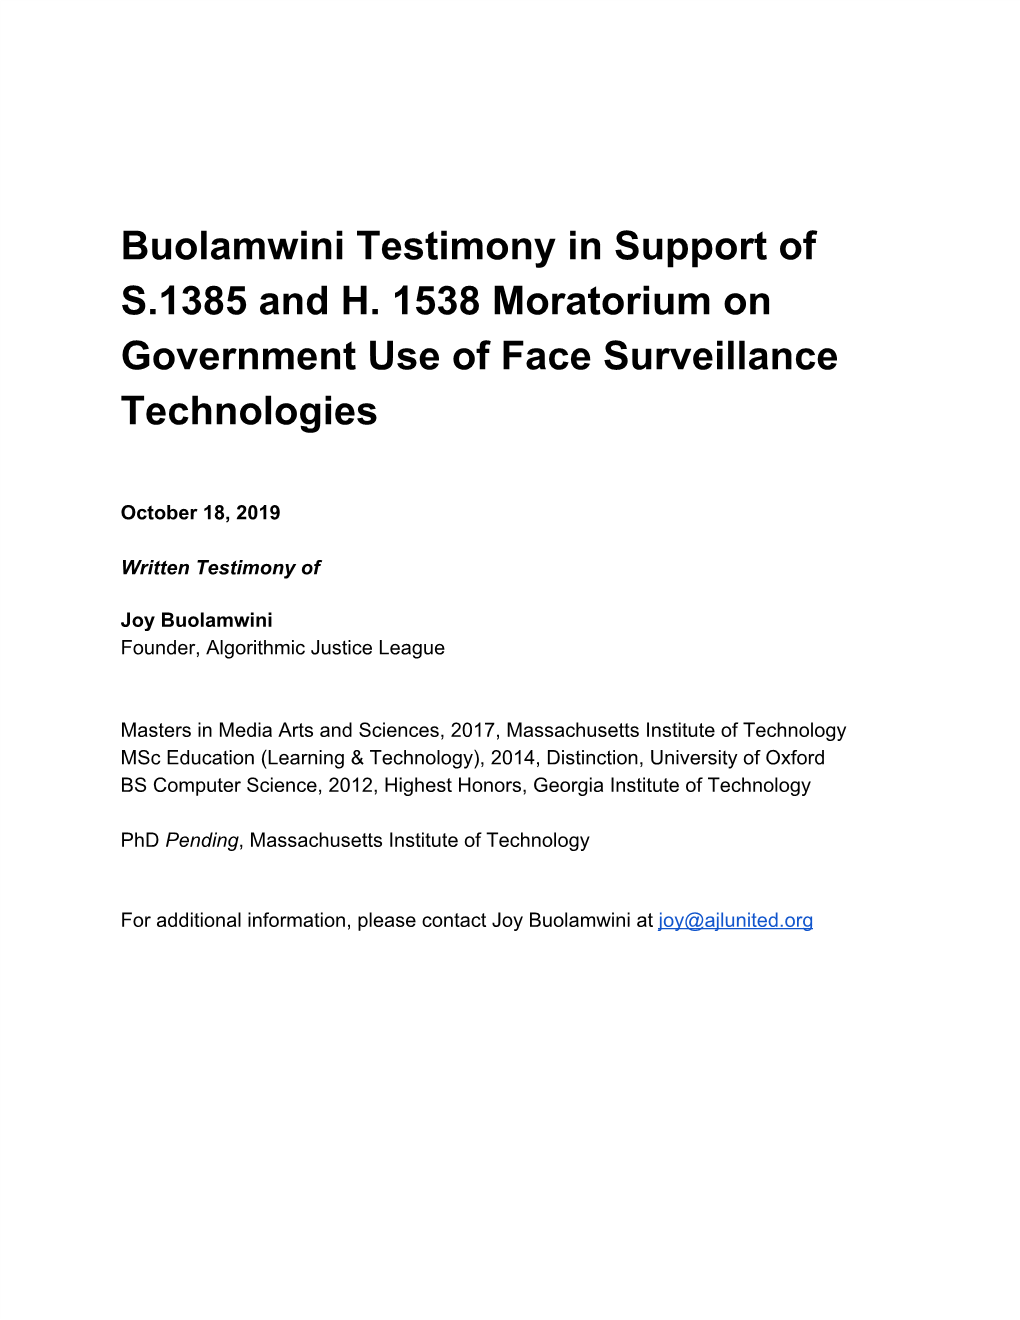 Buolamwini Testimony in Support of S.1385 and H. 1538 Moratorium on Government Use of Face Surveillance Technologies